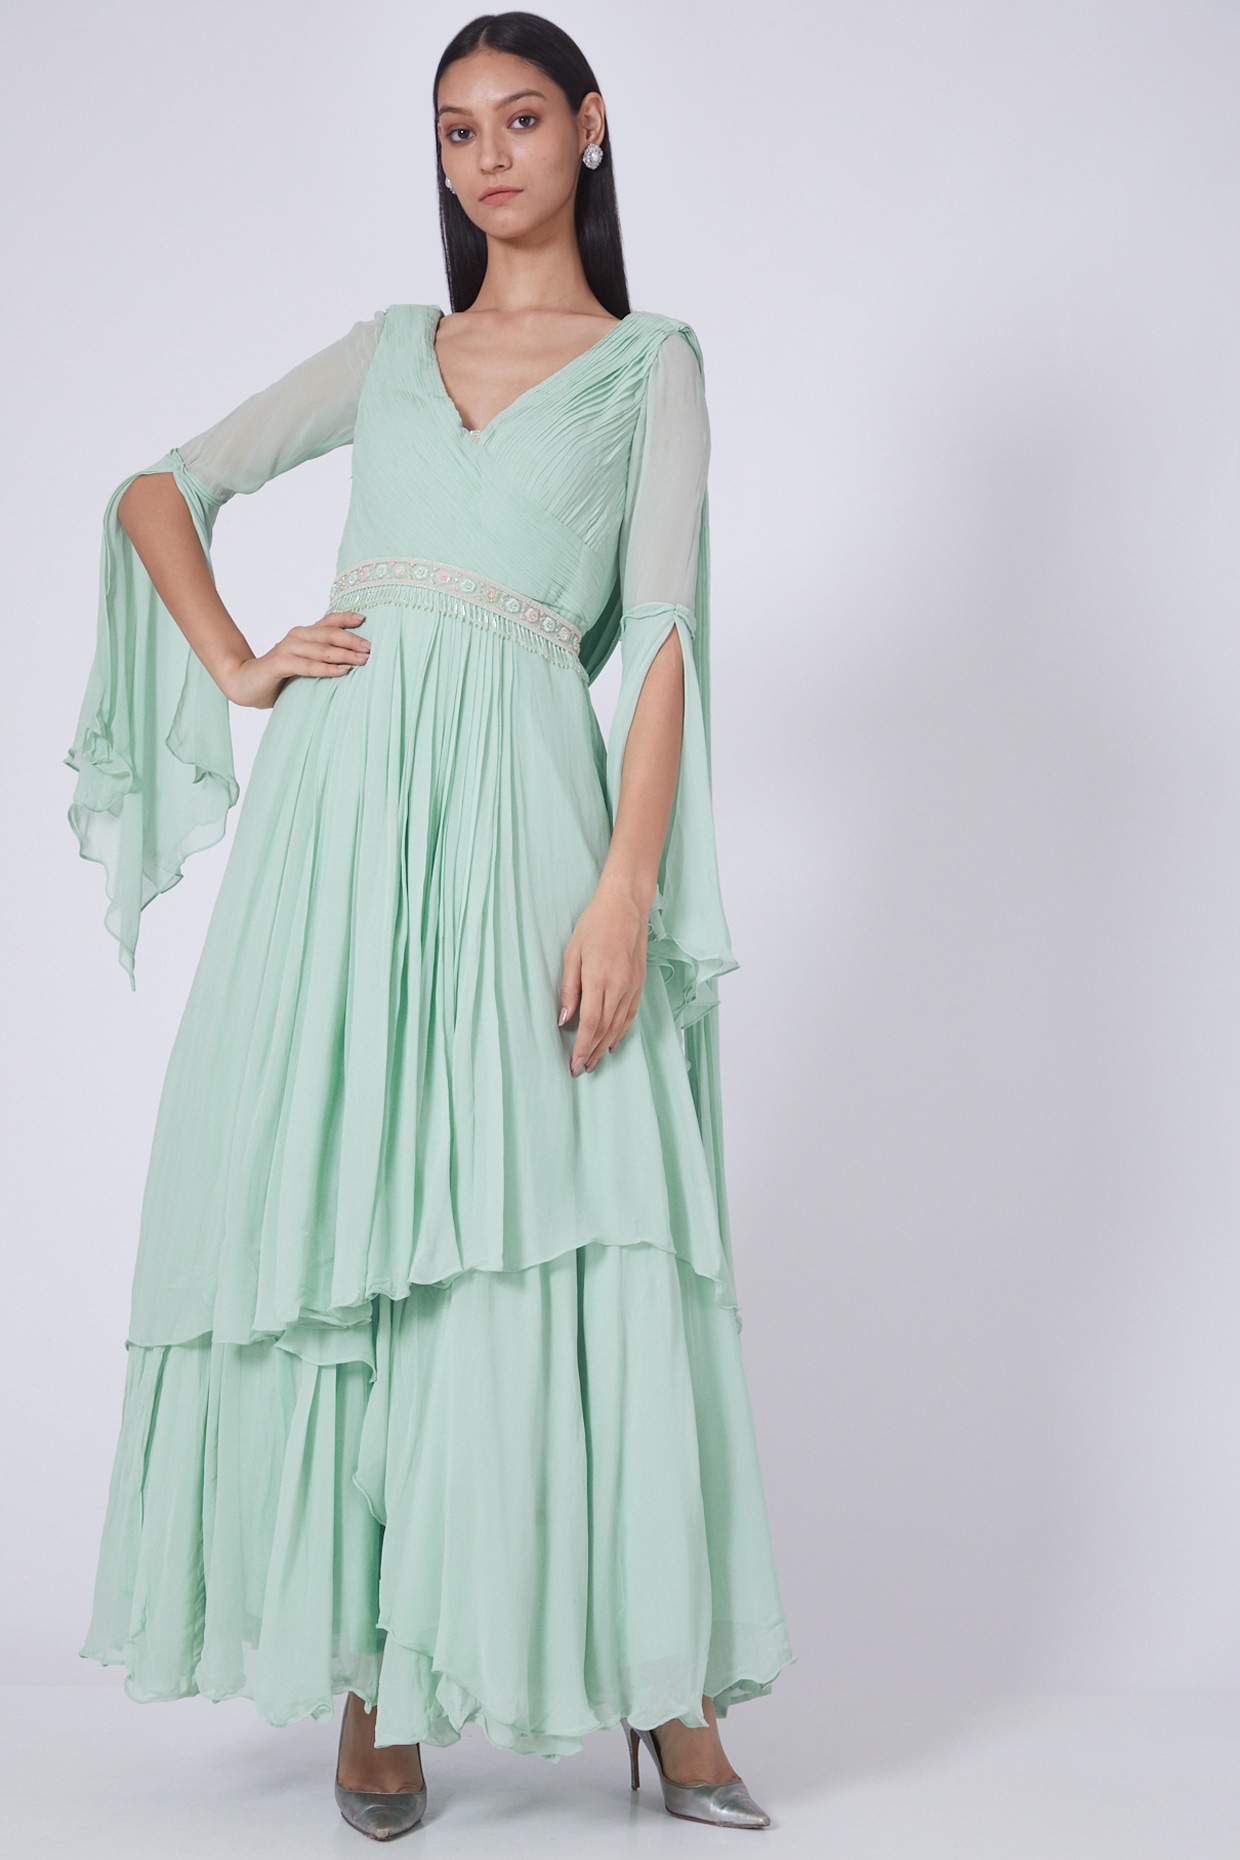 Ethnic Gowns | Anarkali Dress No Flaws | Freeup